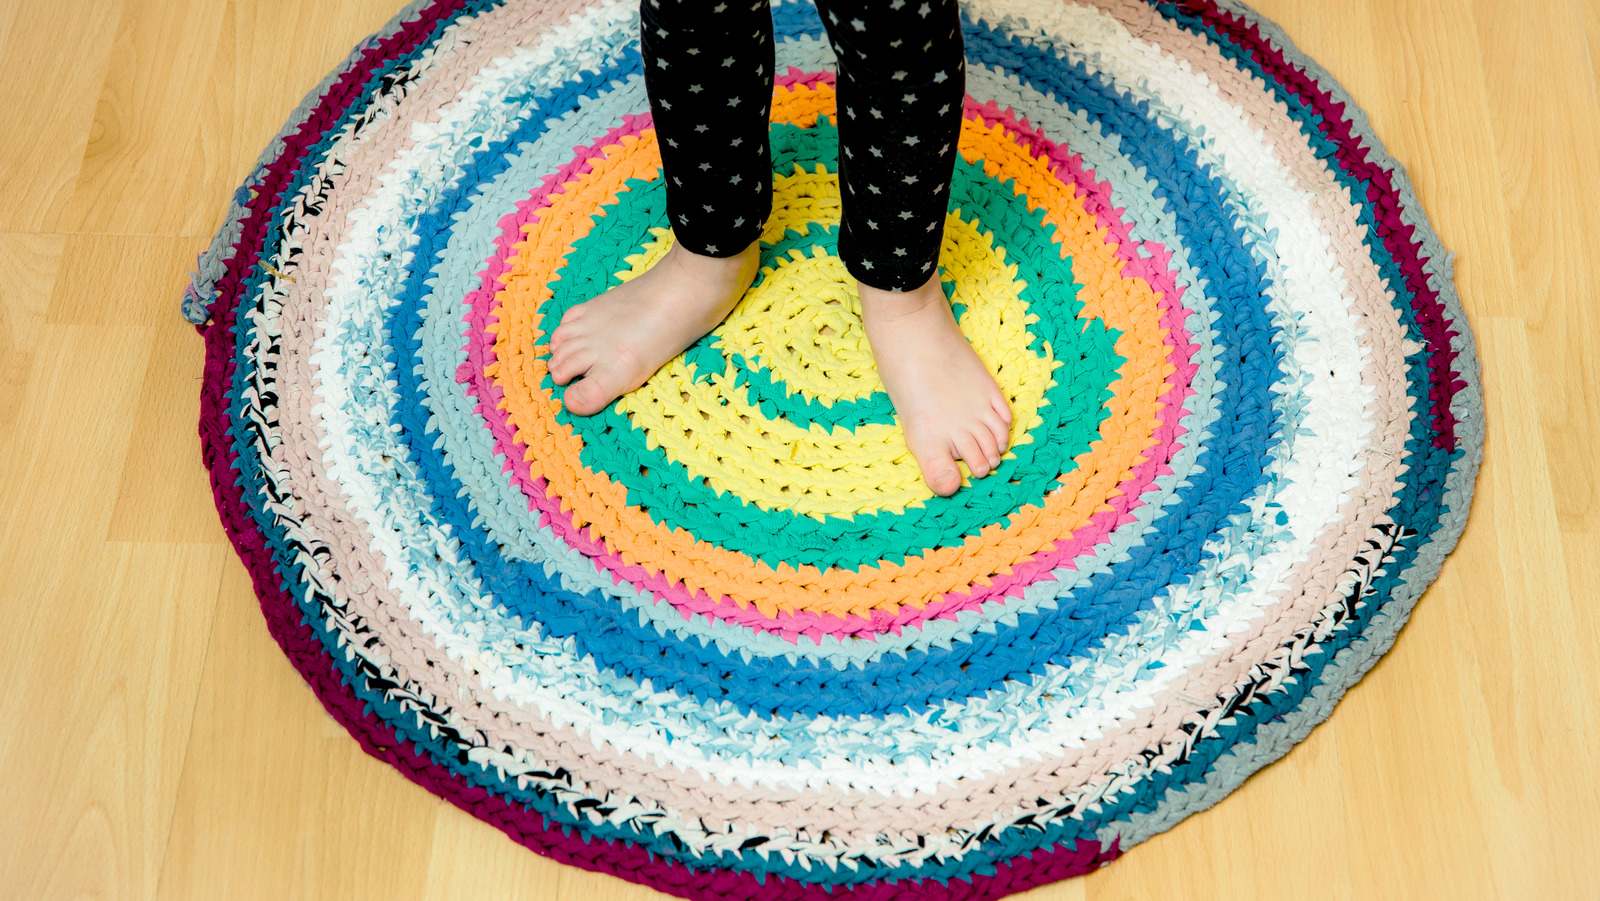 7 Easy Steps of How to Make a Braided Rug at Home DIY